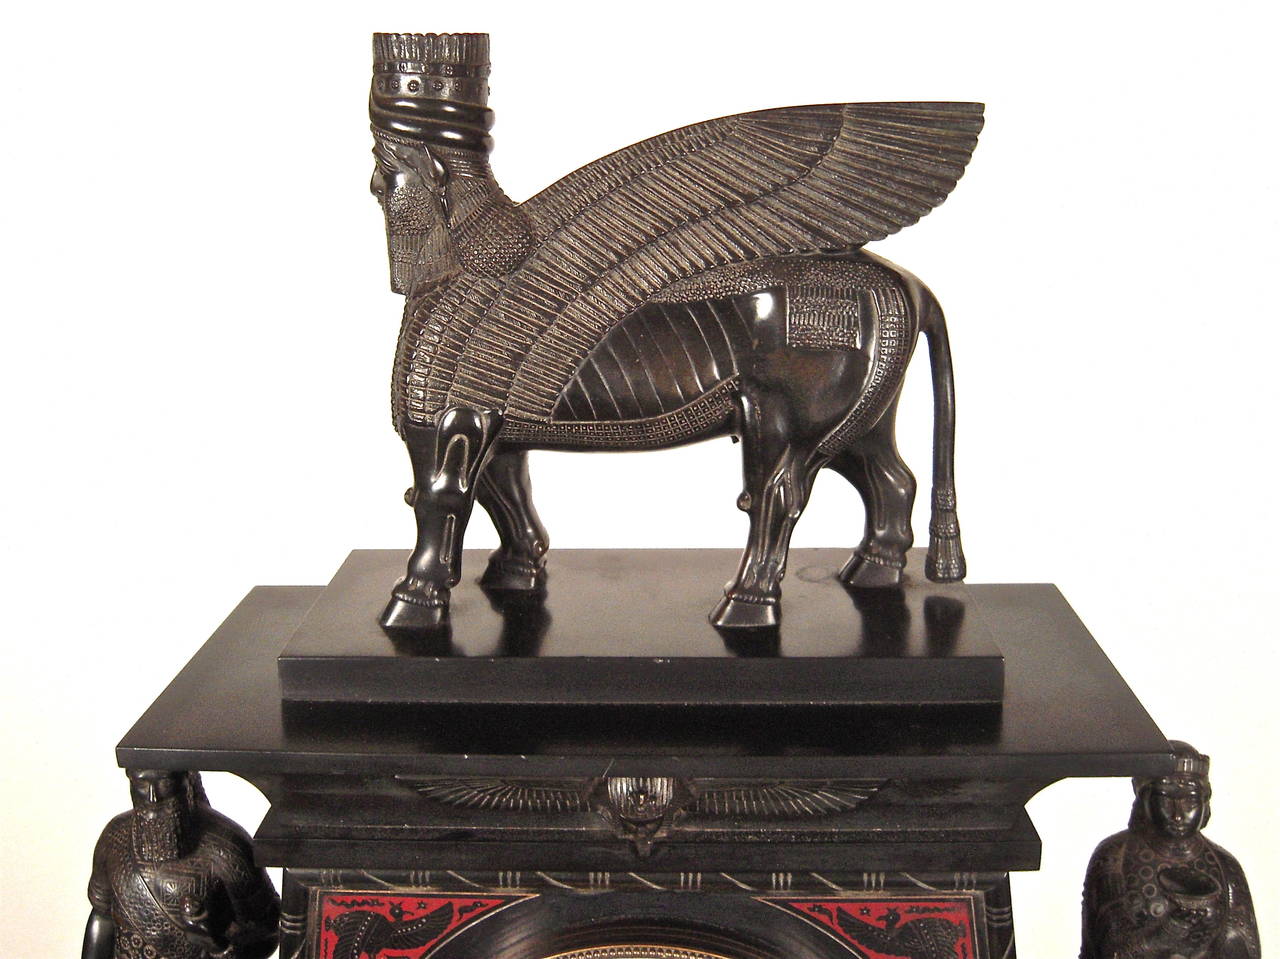 A fine quality French bronze-mounted incised black marble (marmo nero Belgio) striking mantel clock in the Assyrian Revival style, circa 1860,
the substantial, architectural case surmounted by an Assyrian winged guardian (known as a Lamassu) and